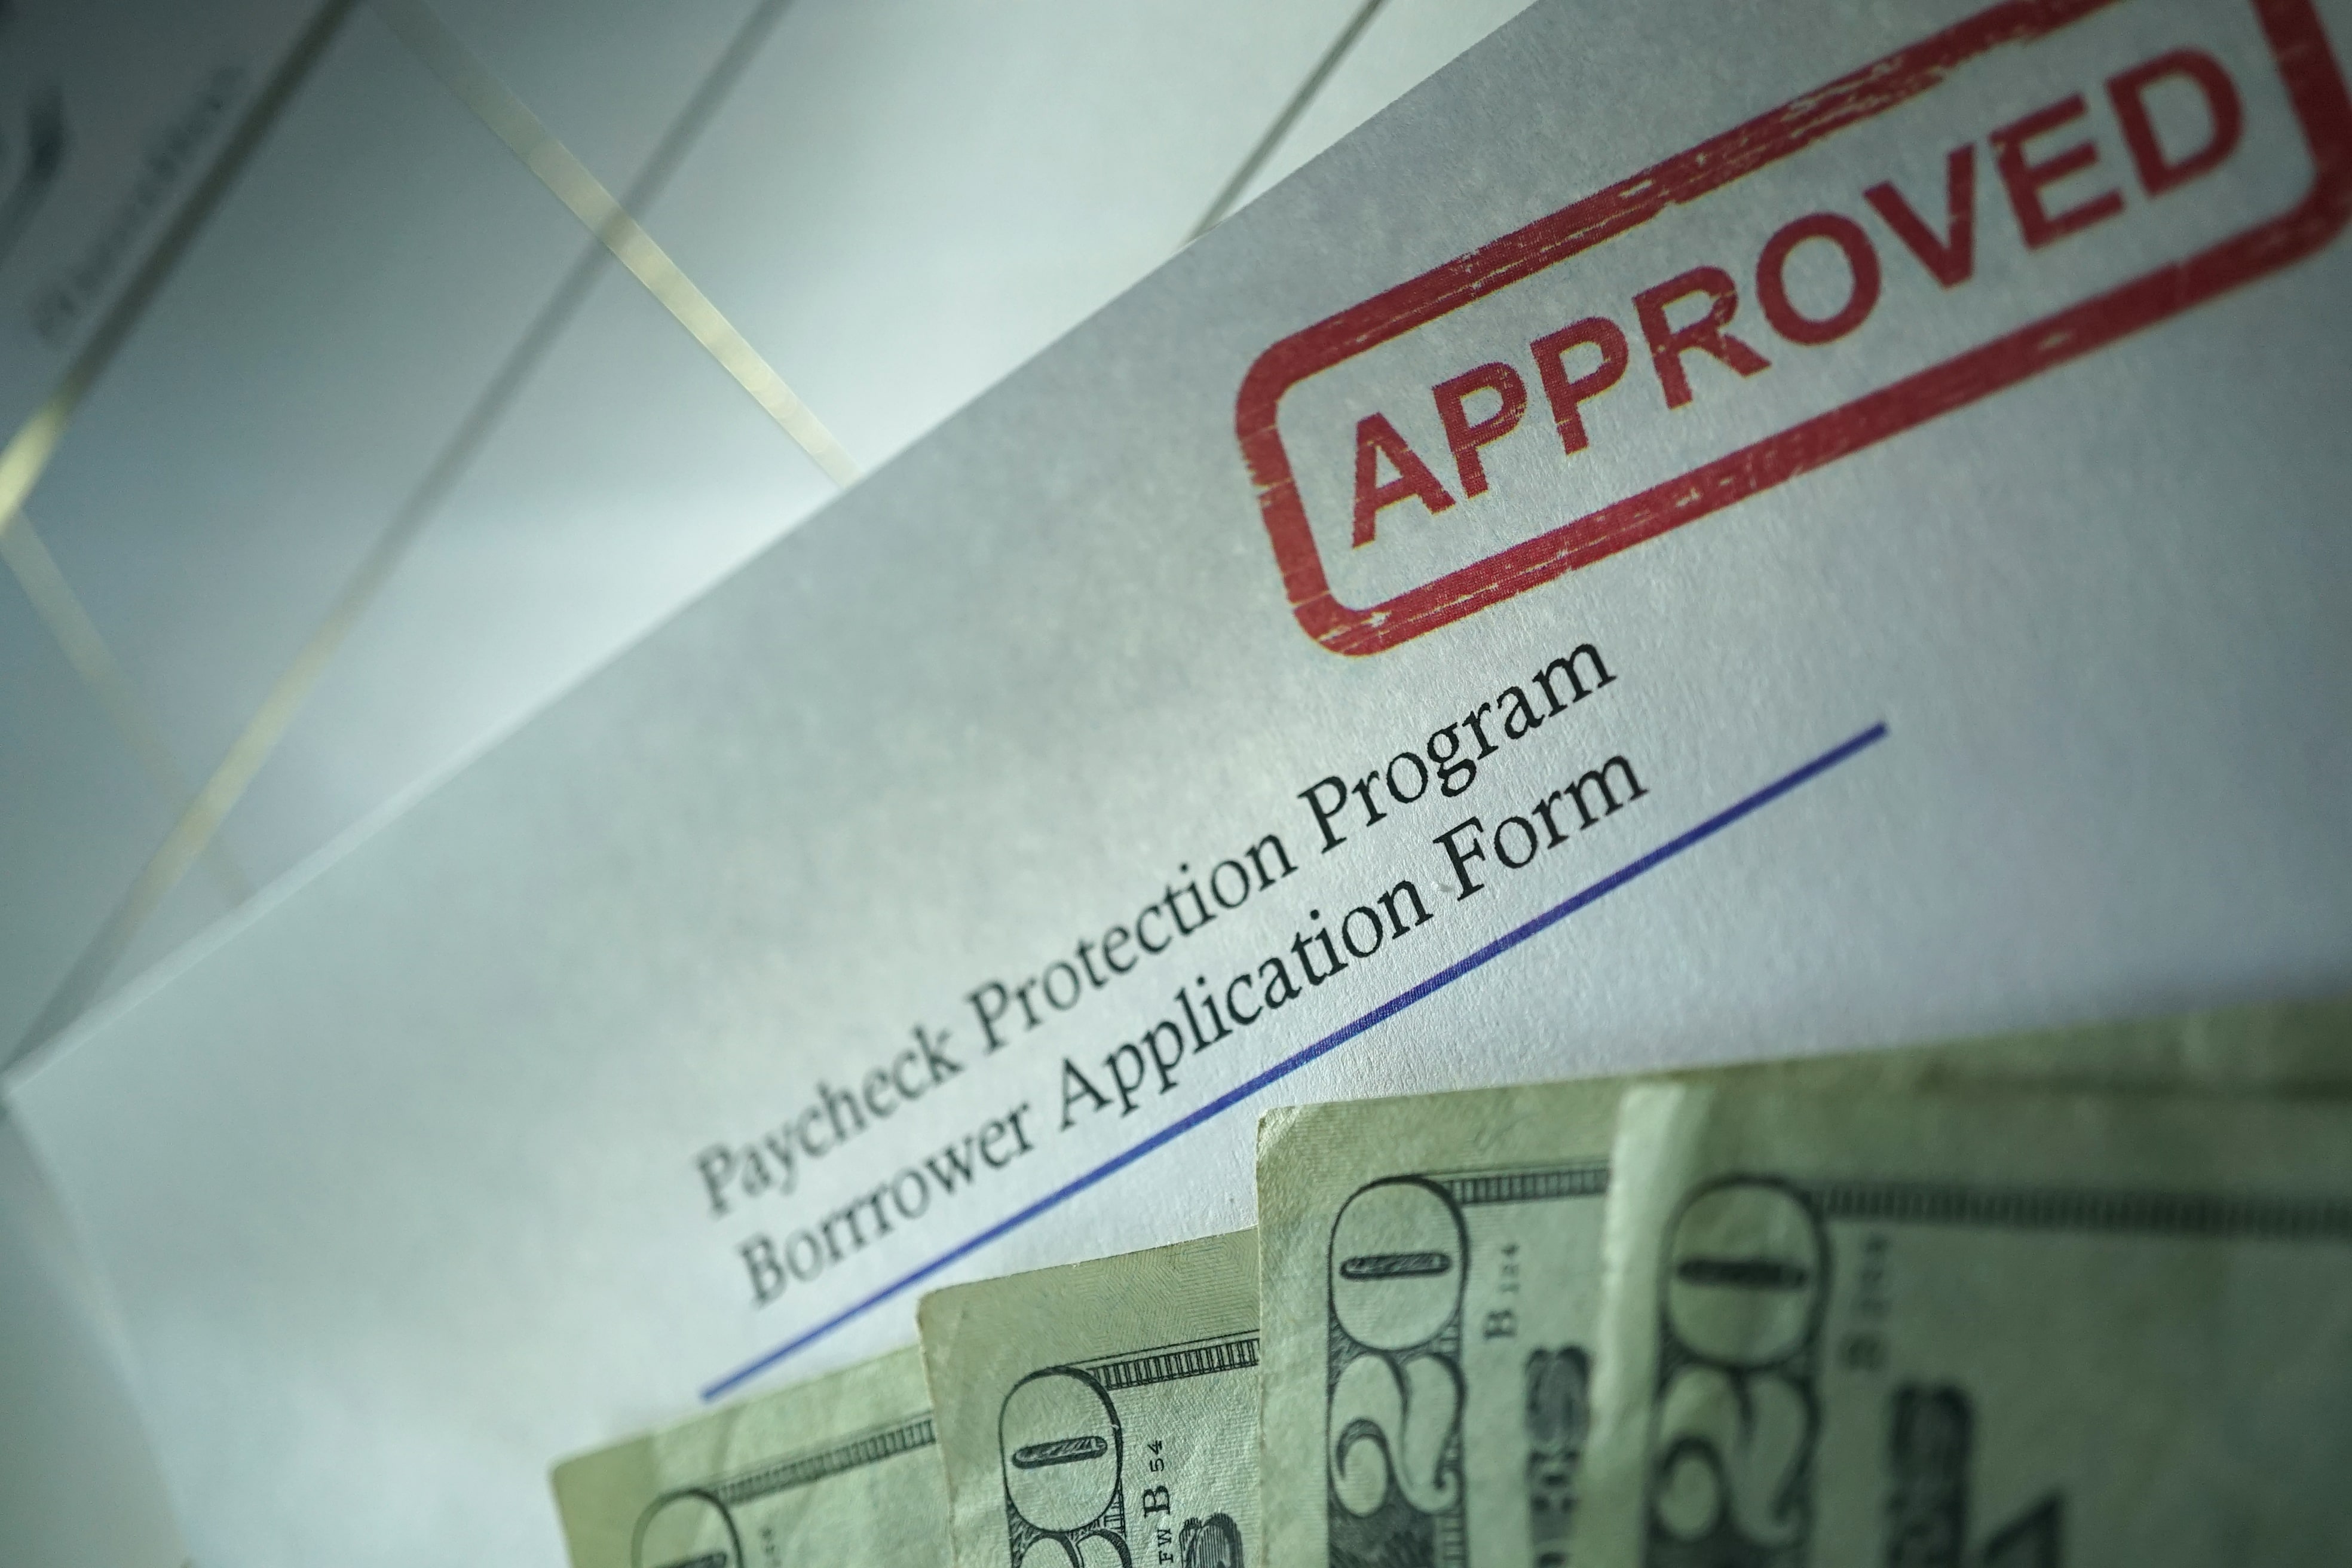 PPP loan forgiveness application & instructions now available